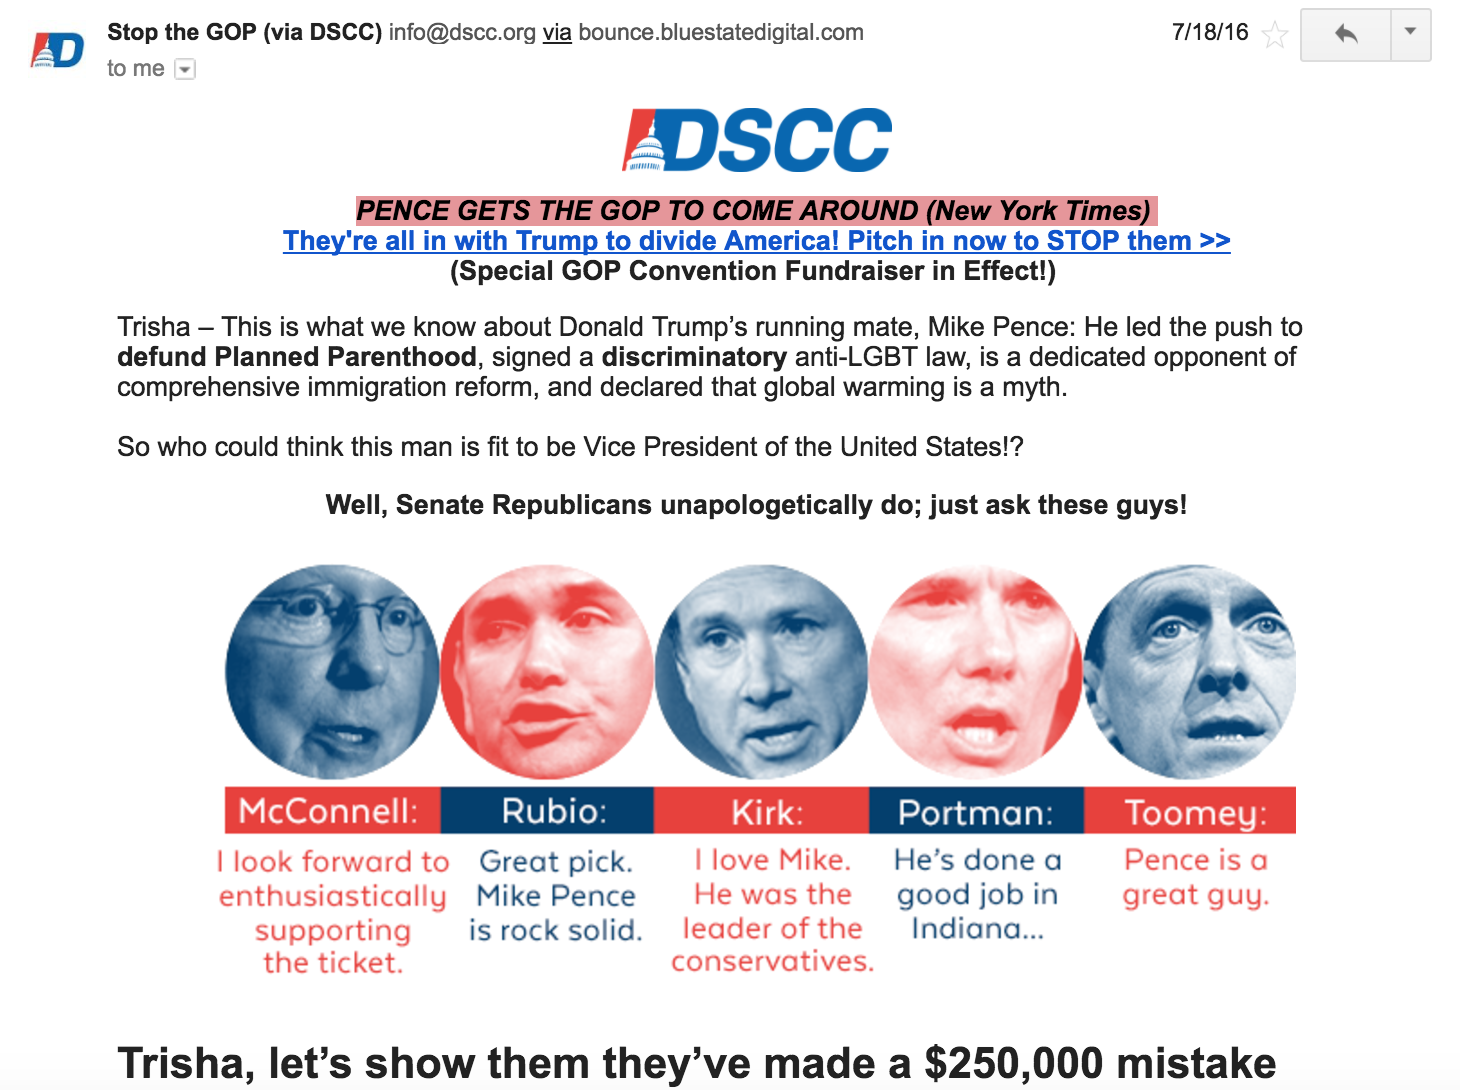 WWW_DSCC_Email_06.png